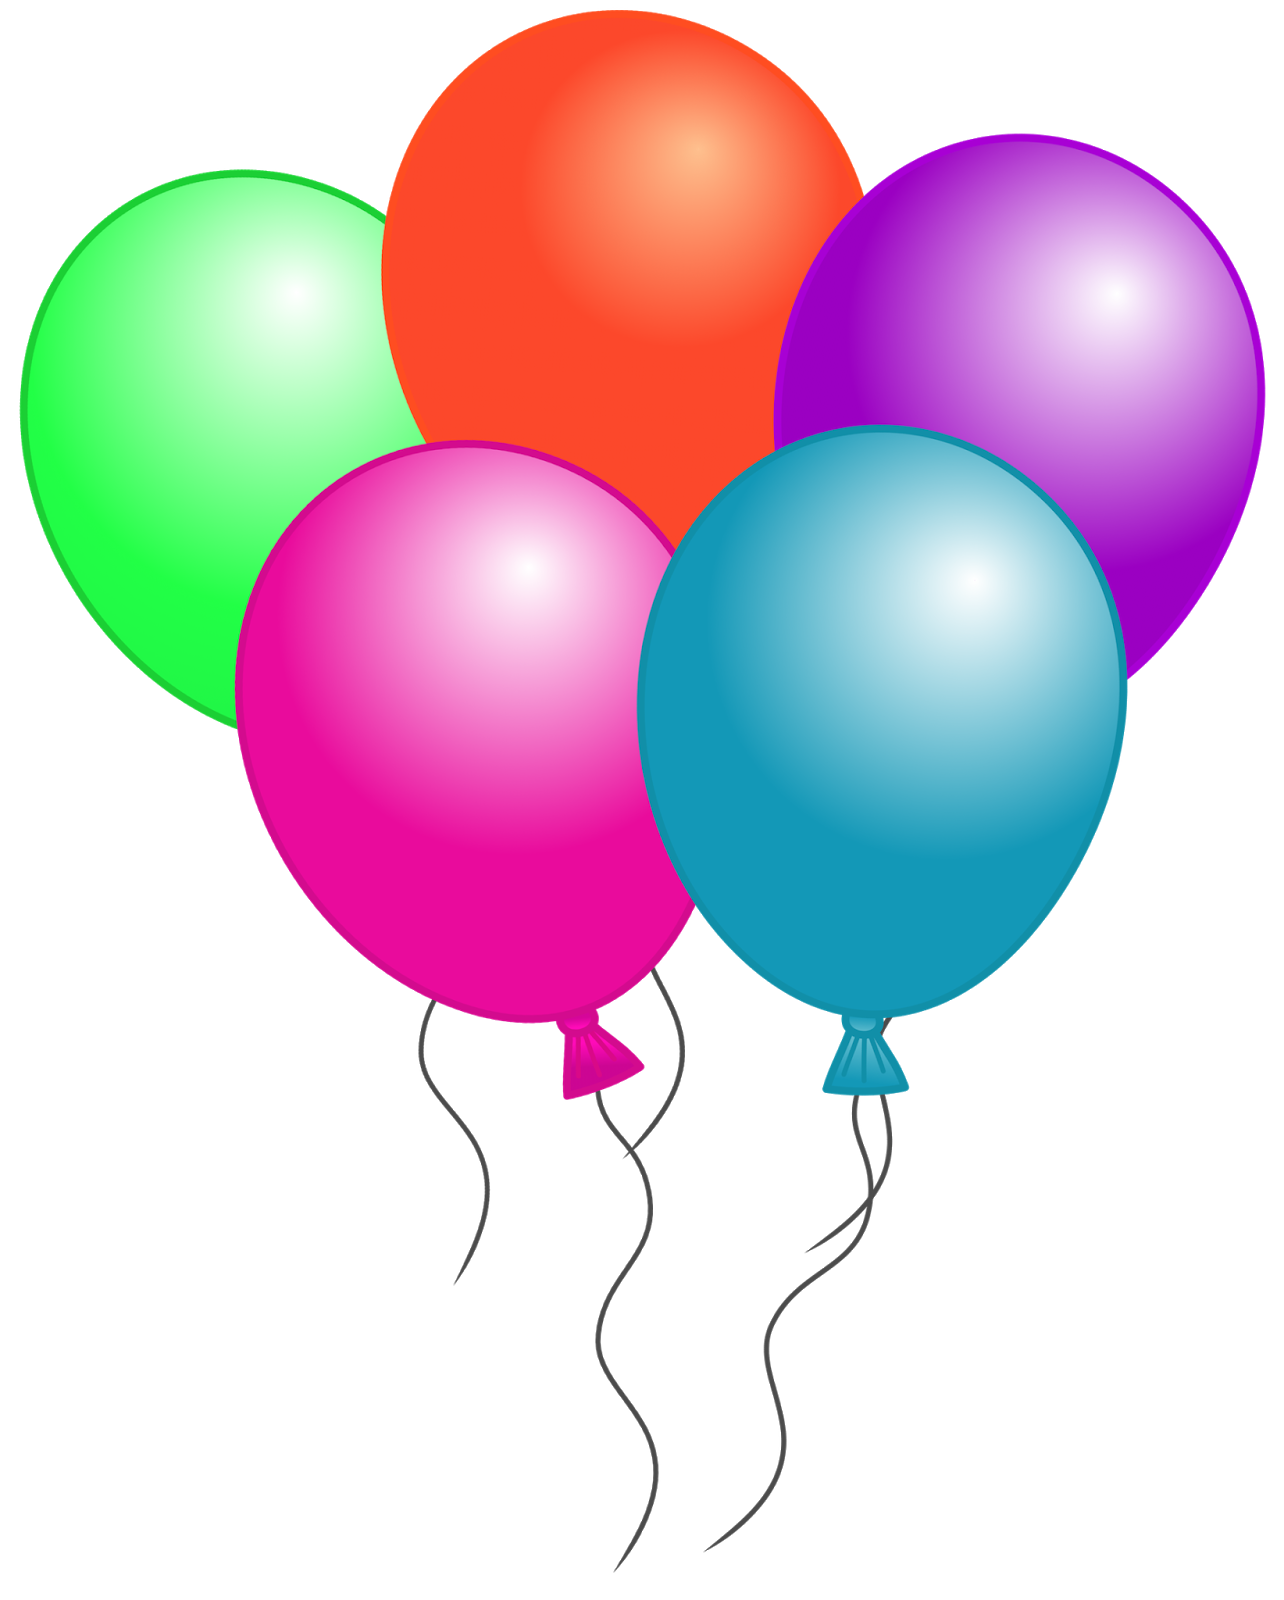 Free birthday balloon clip art clipart images